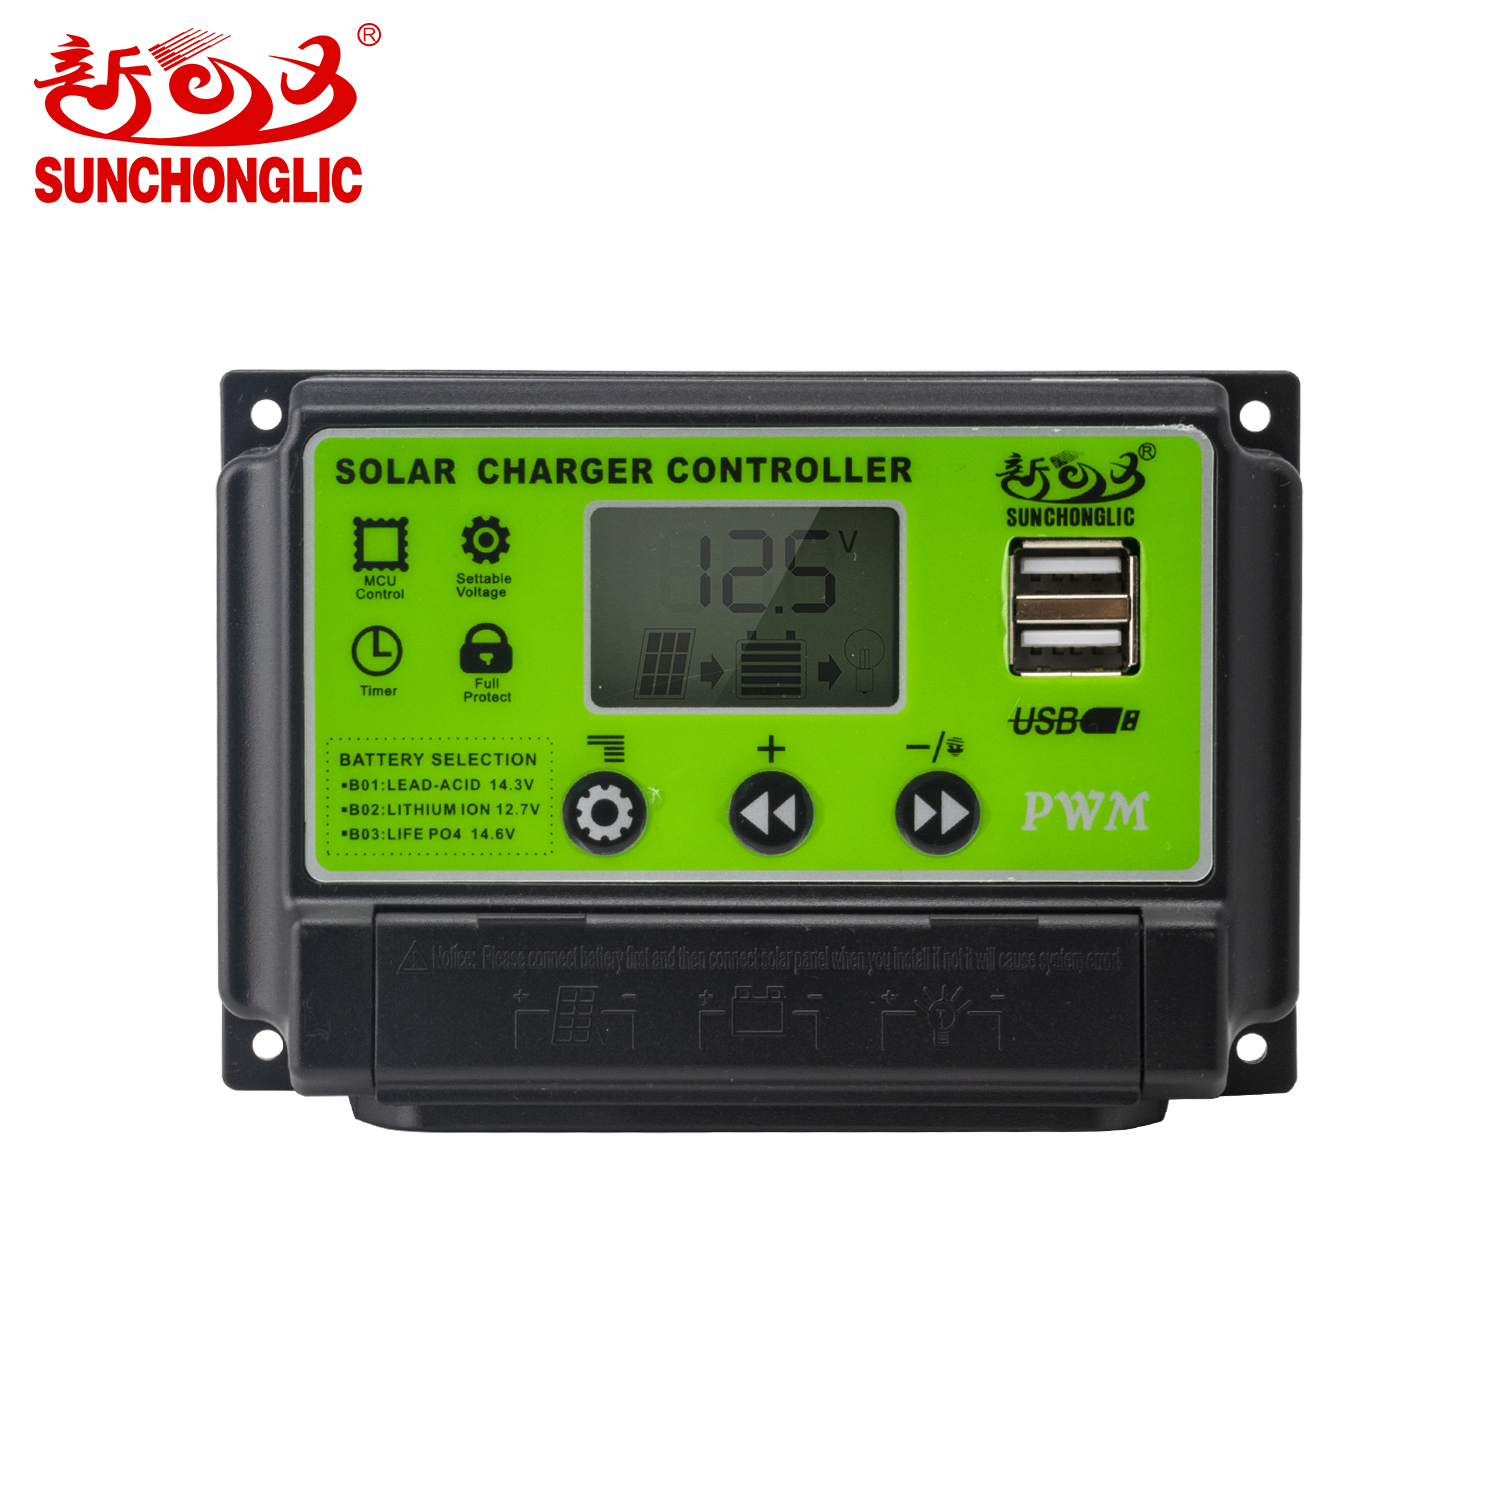 PWM Solar Charge Controller - FT-S1230